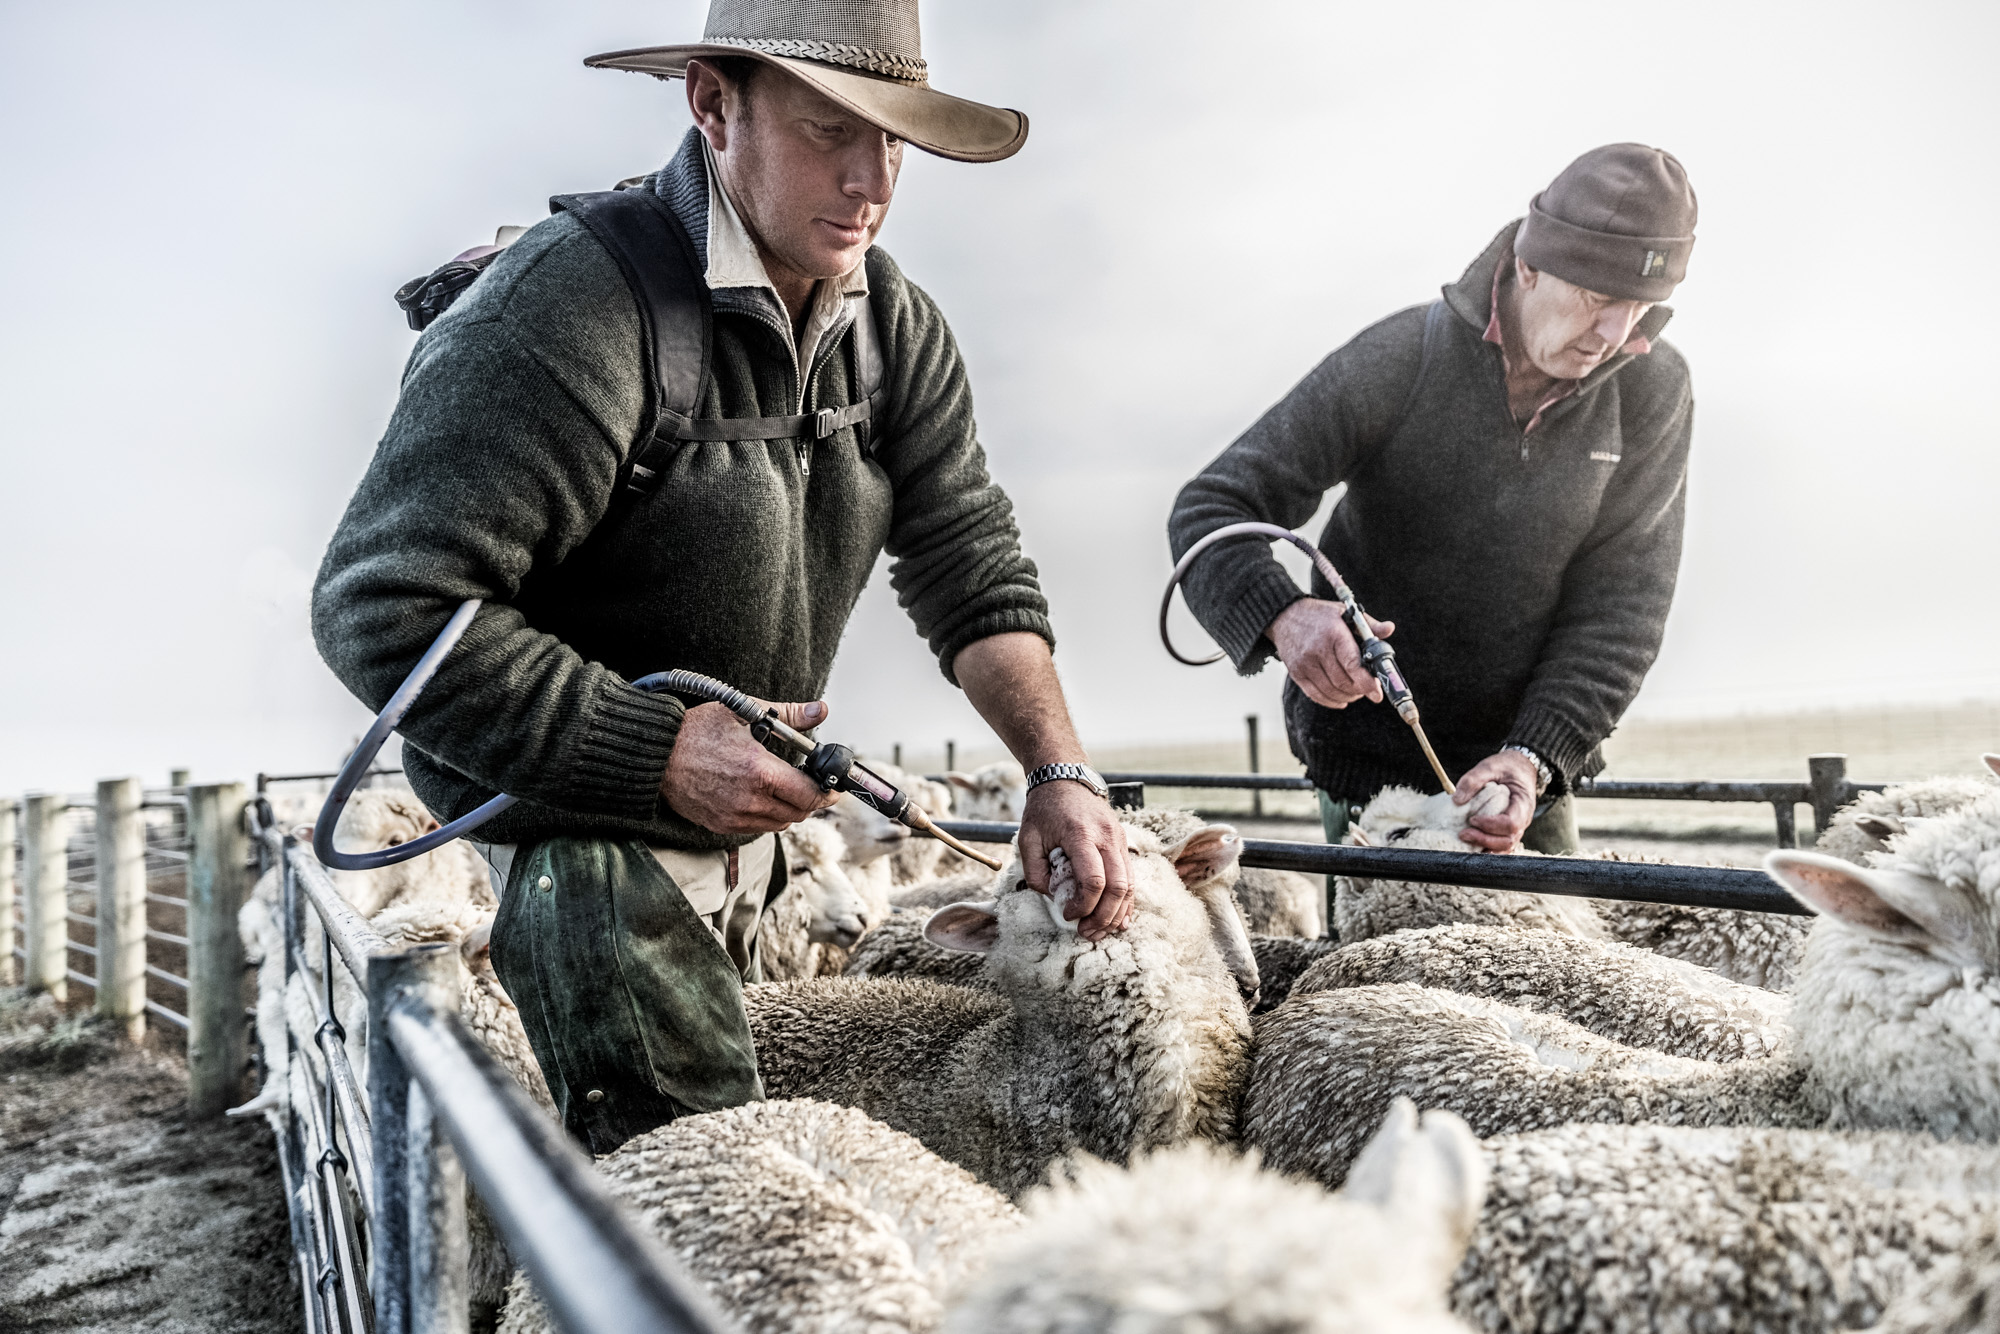 2 sheep farmers immunizing his flock of sheep in new zealand